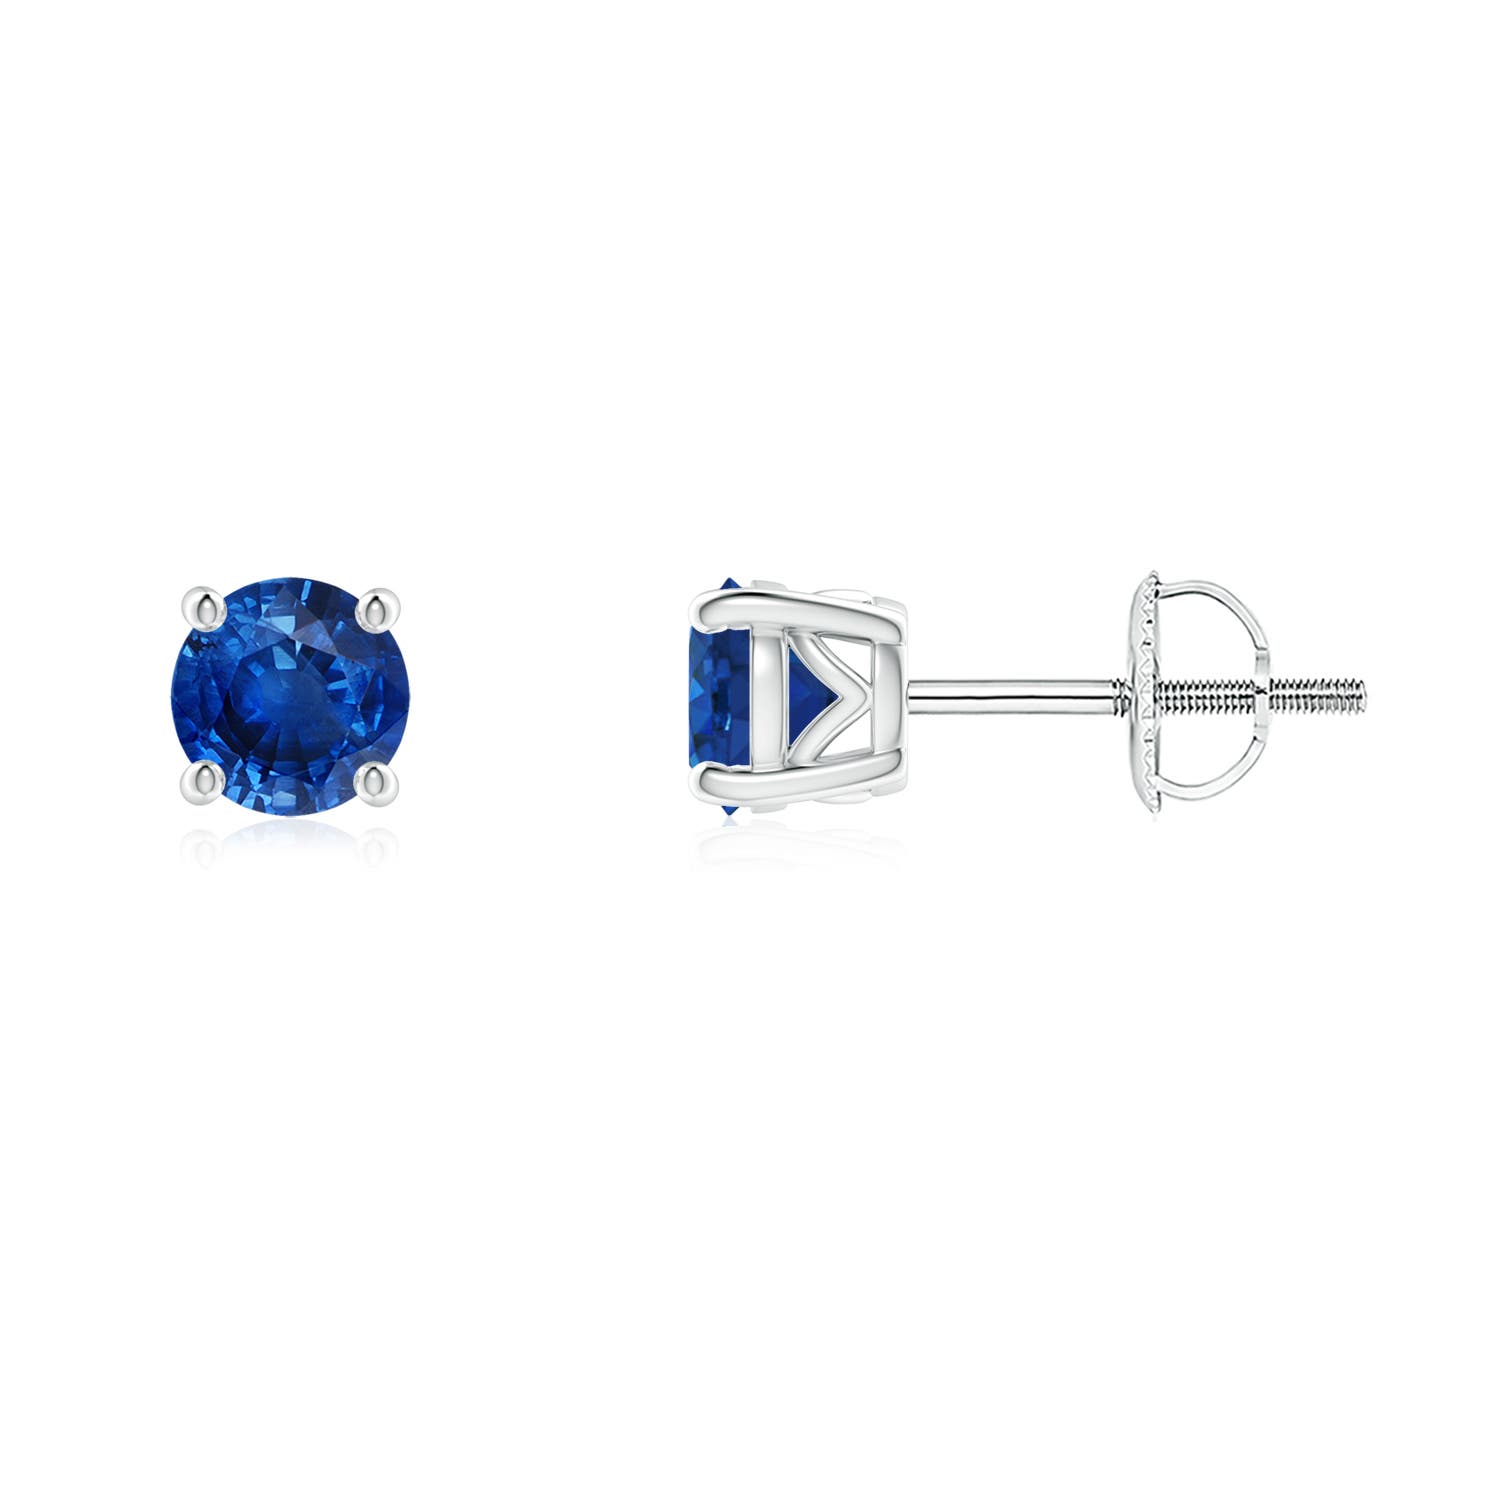 Vintage Style Round Blue Sapphire Solitaire Stud Earrings